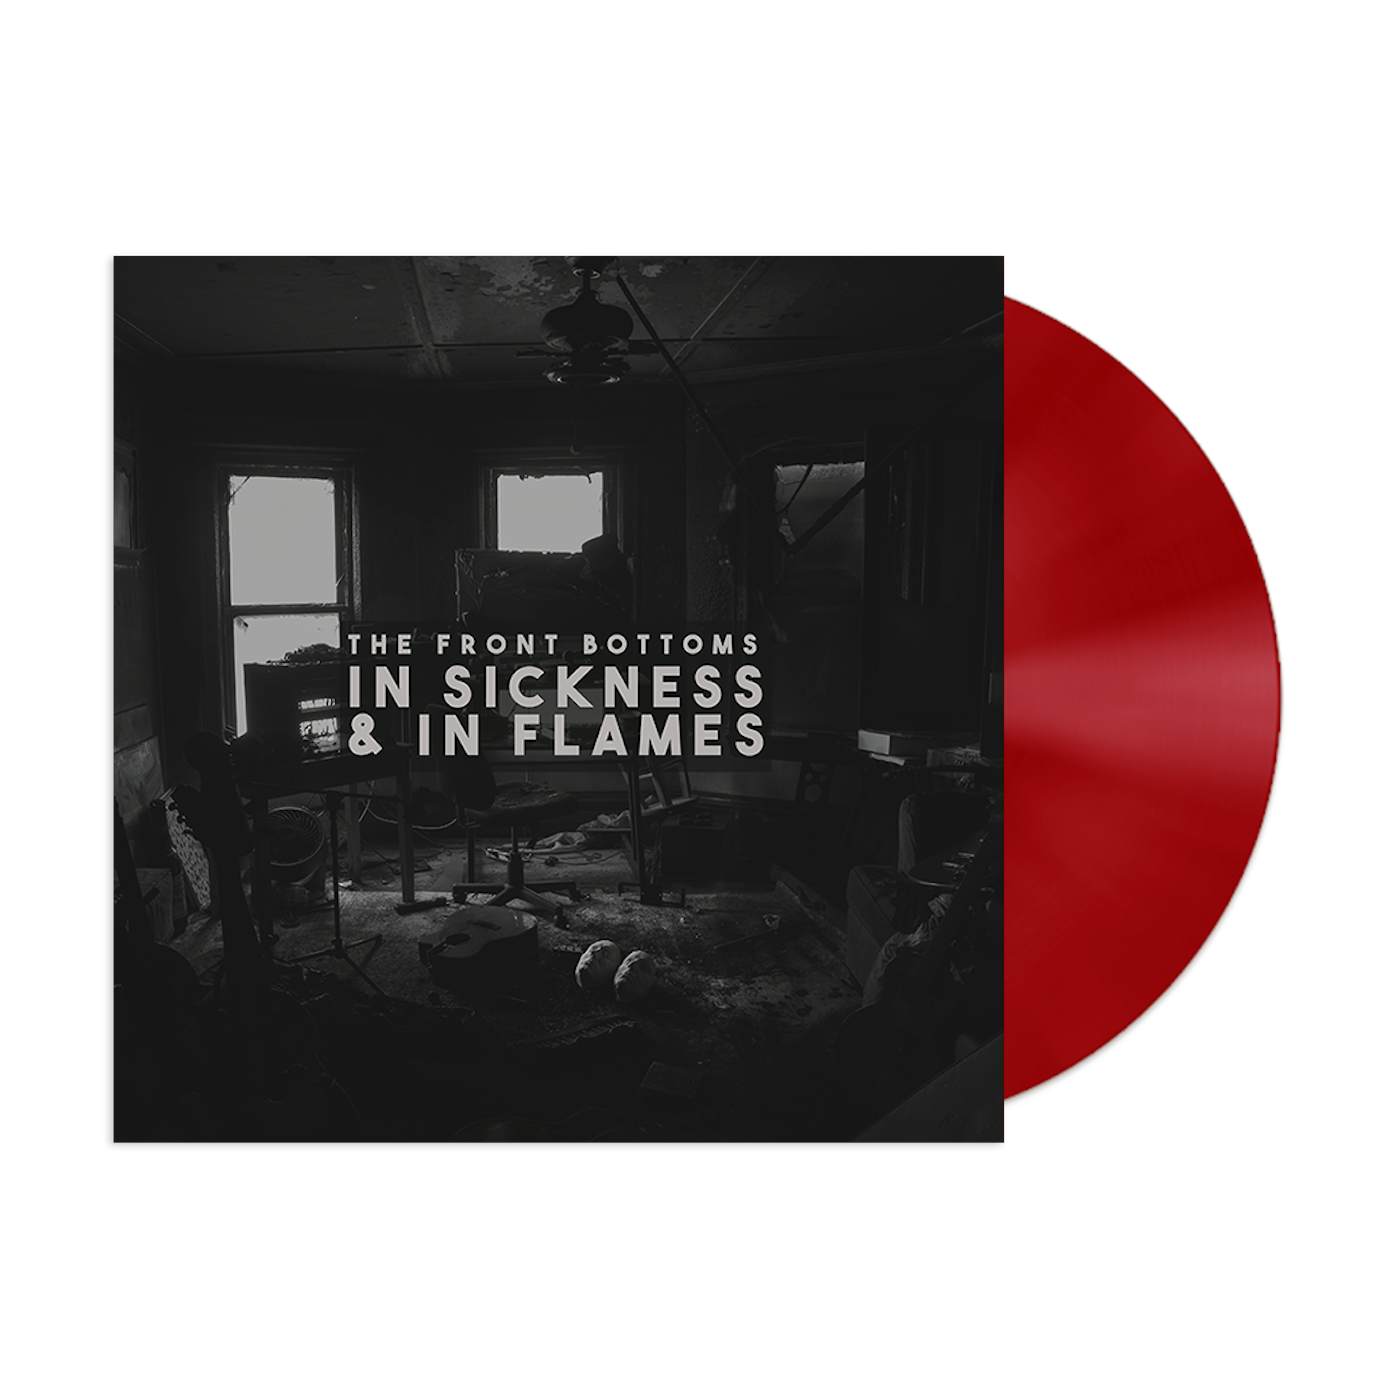 The Front Bottoms In Sickness & In Flames (Red Vinyl)